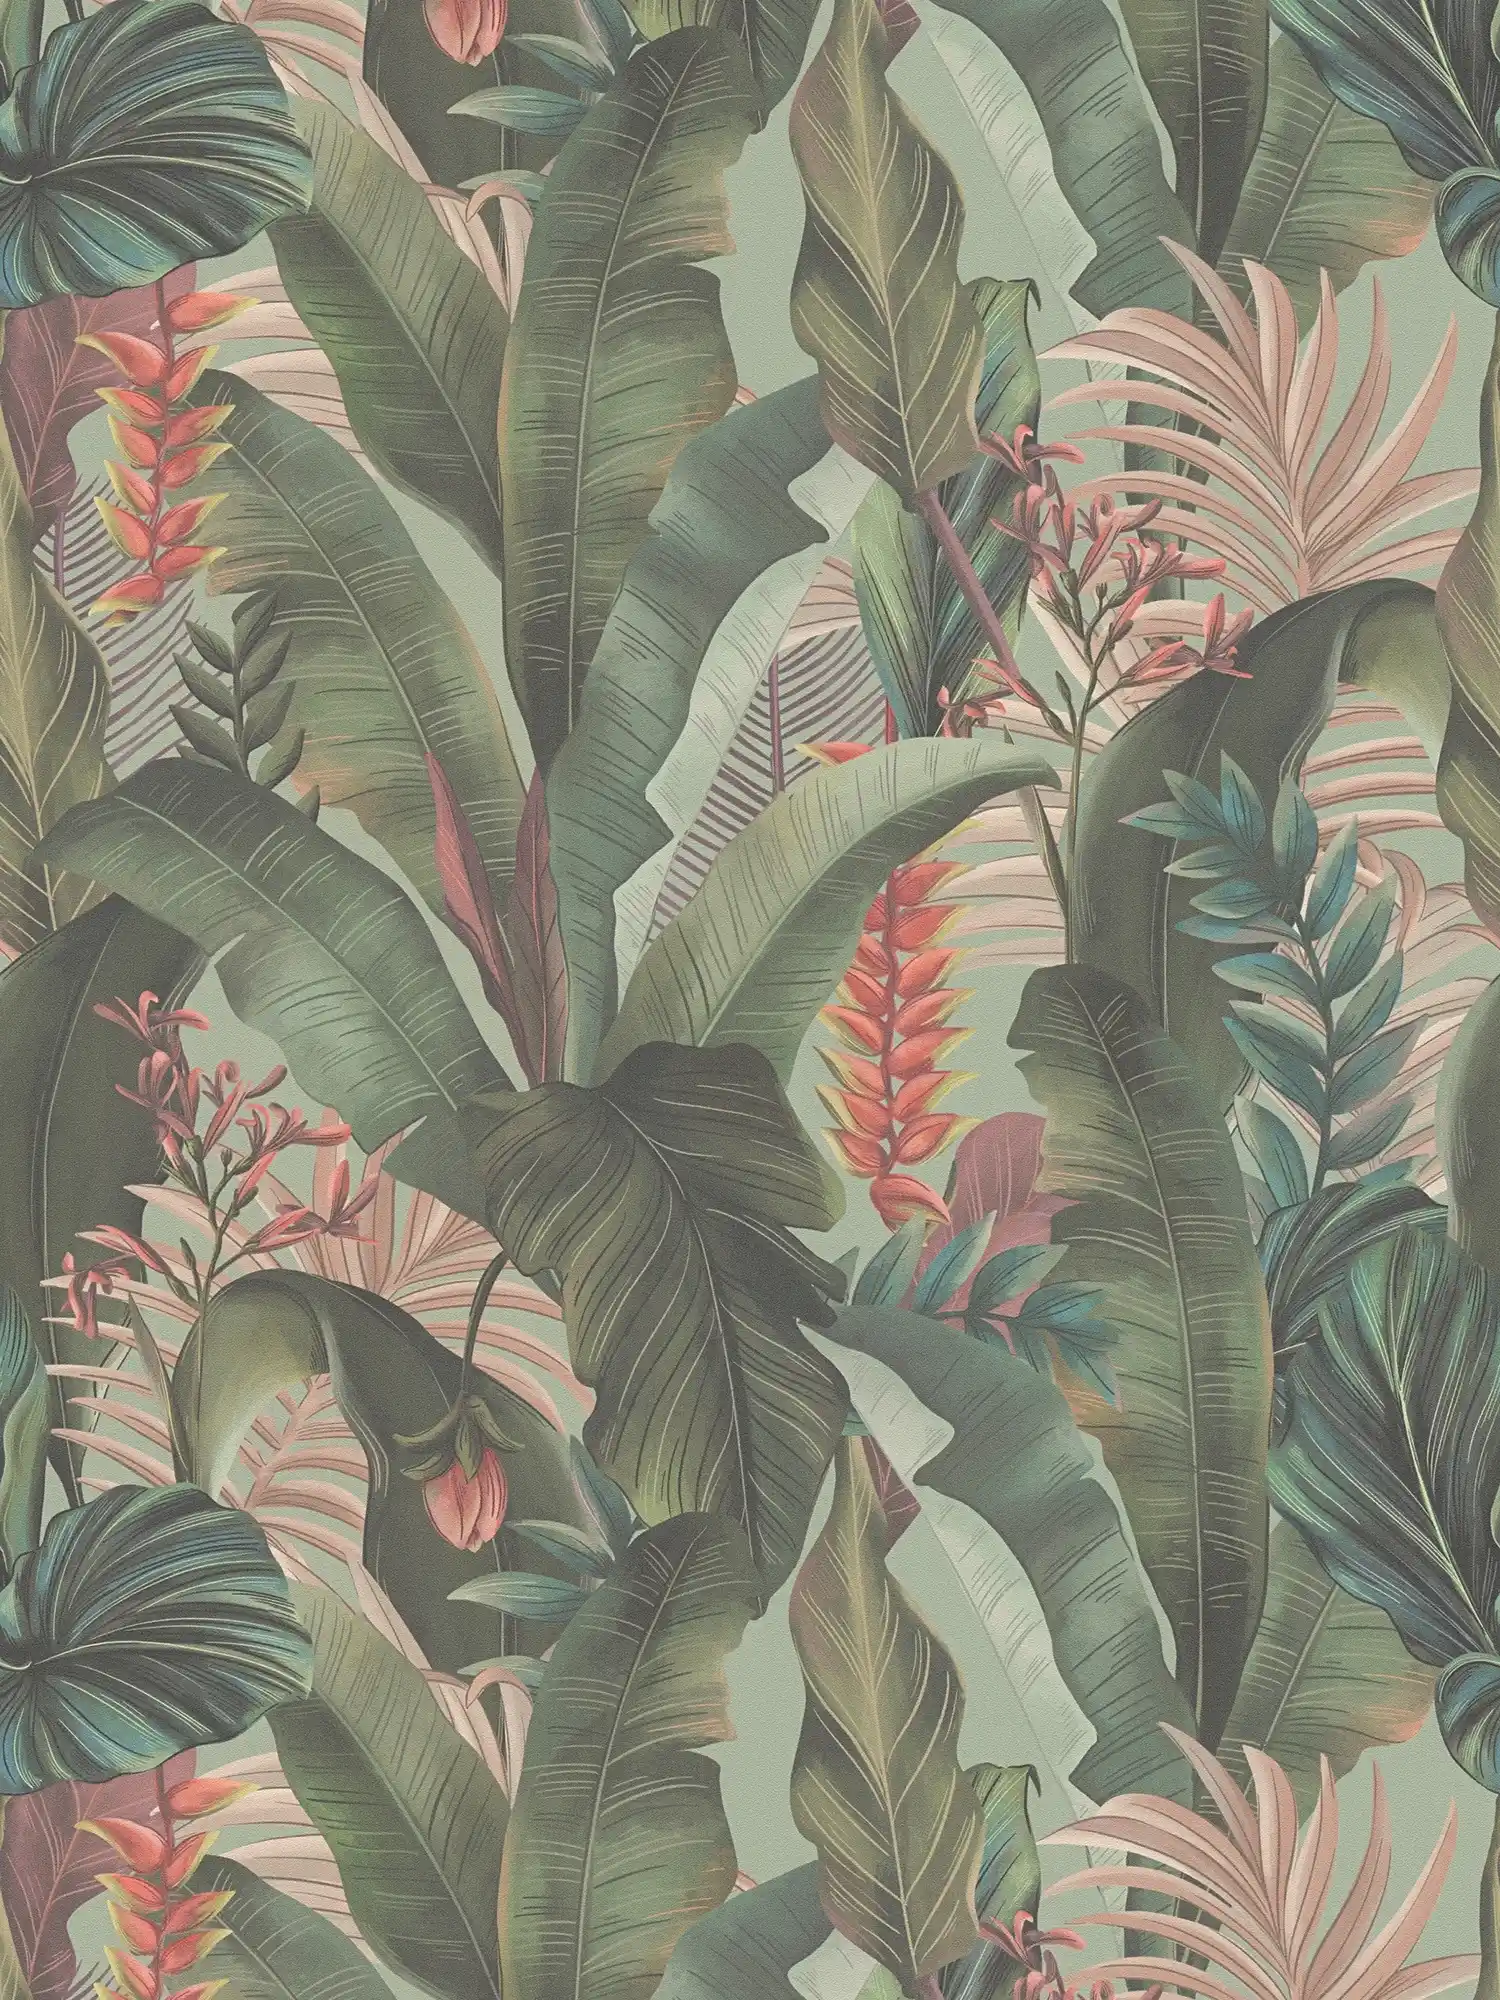             Floral jungle wallpaper with palm leaves & flowers textured matt - green, pink, red
        